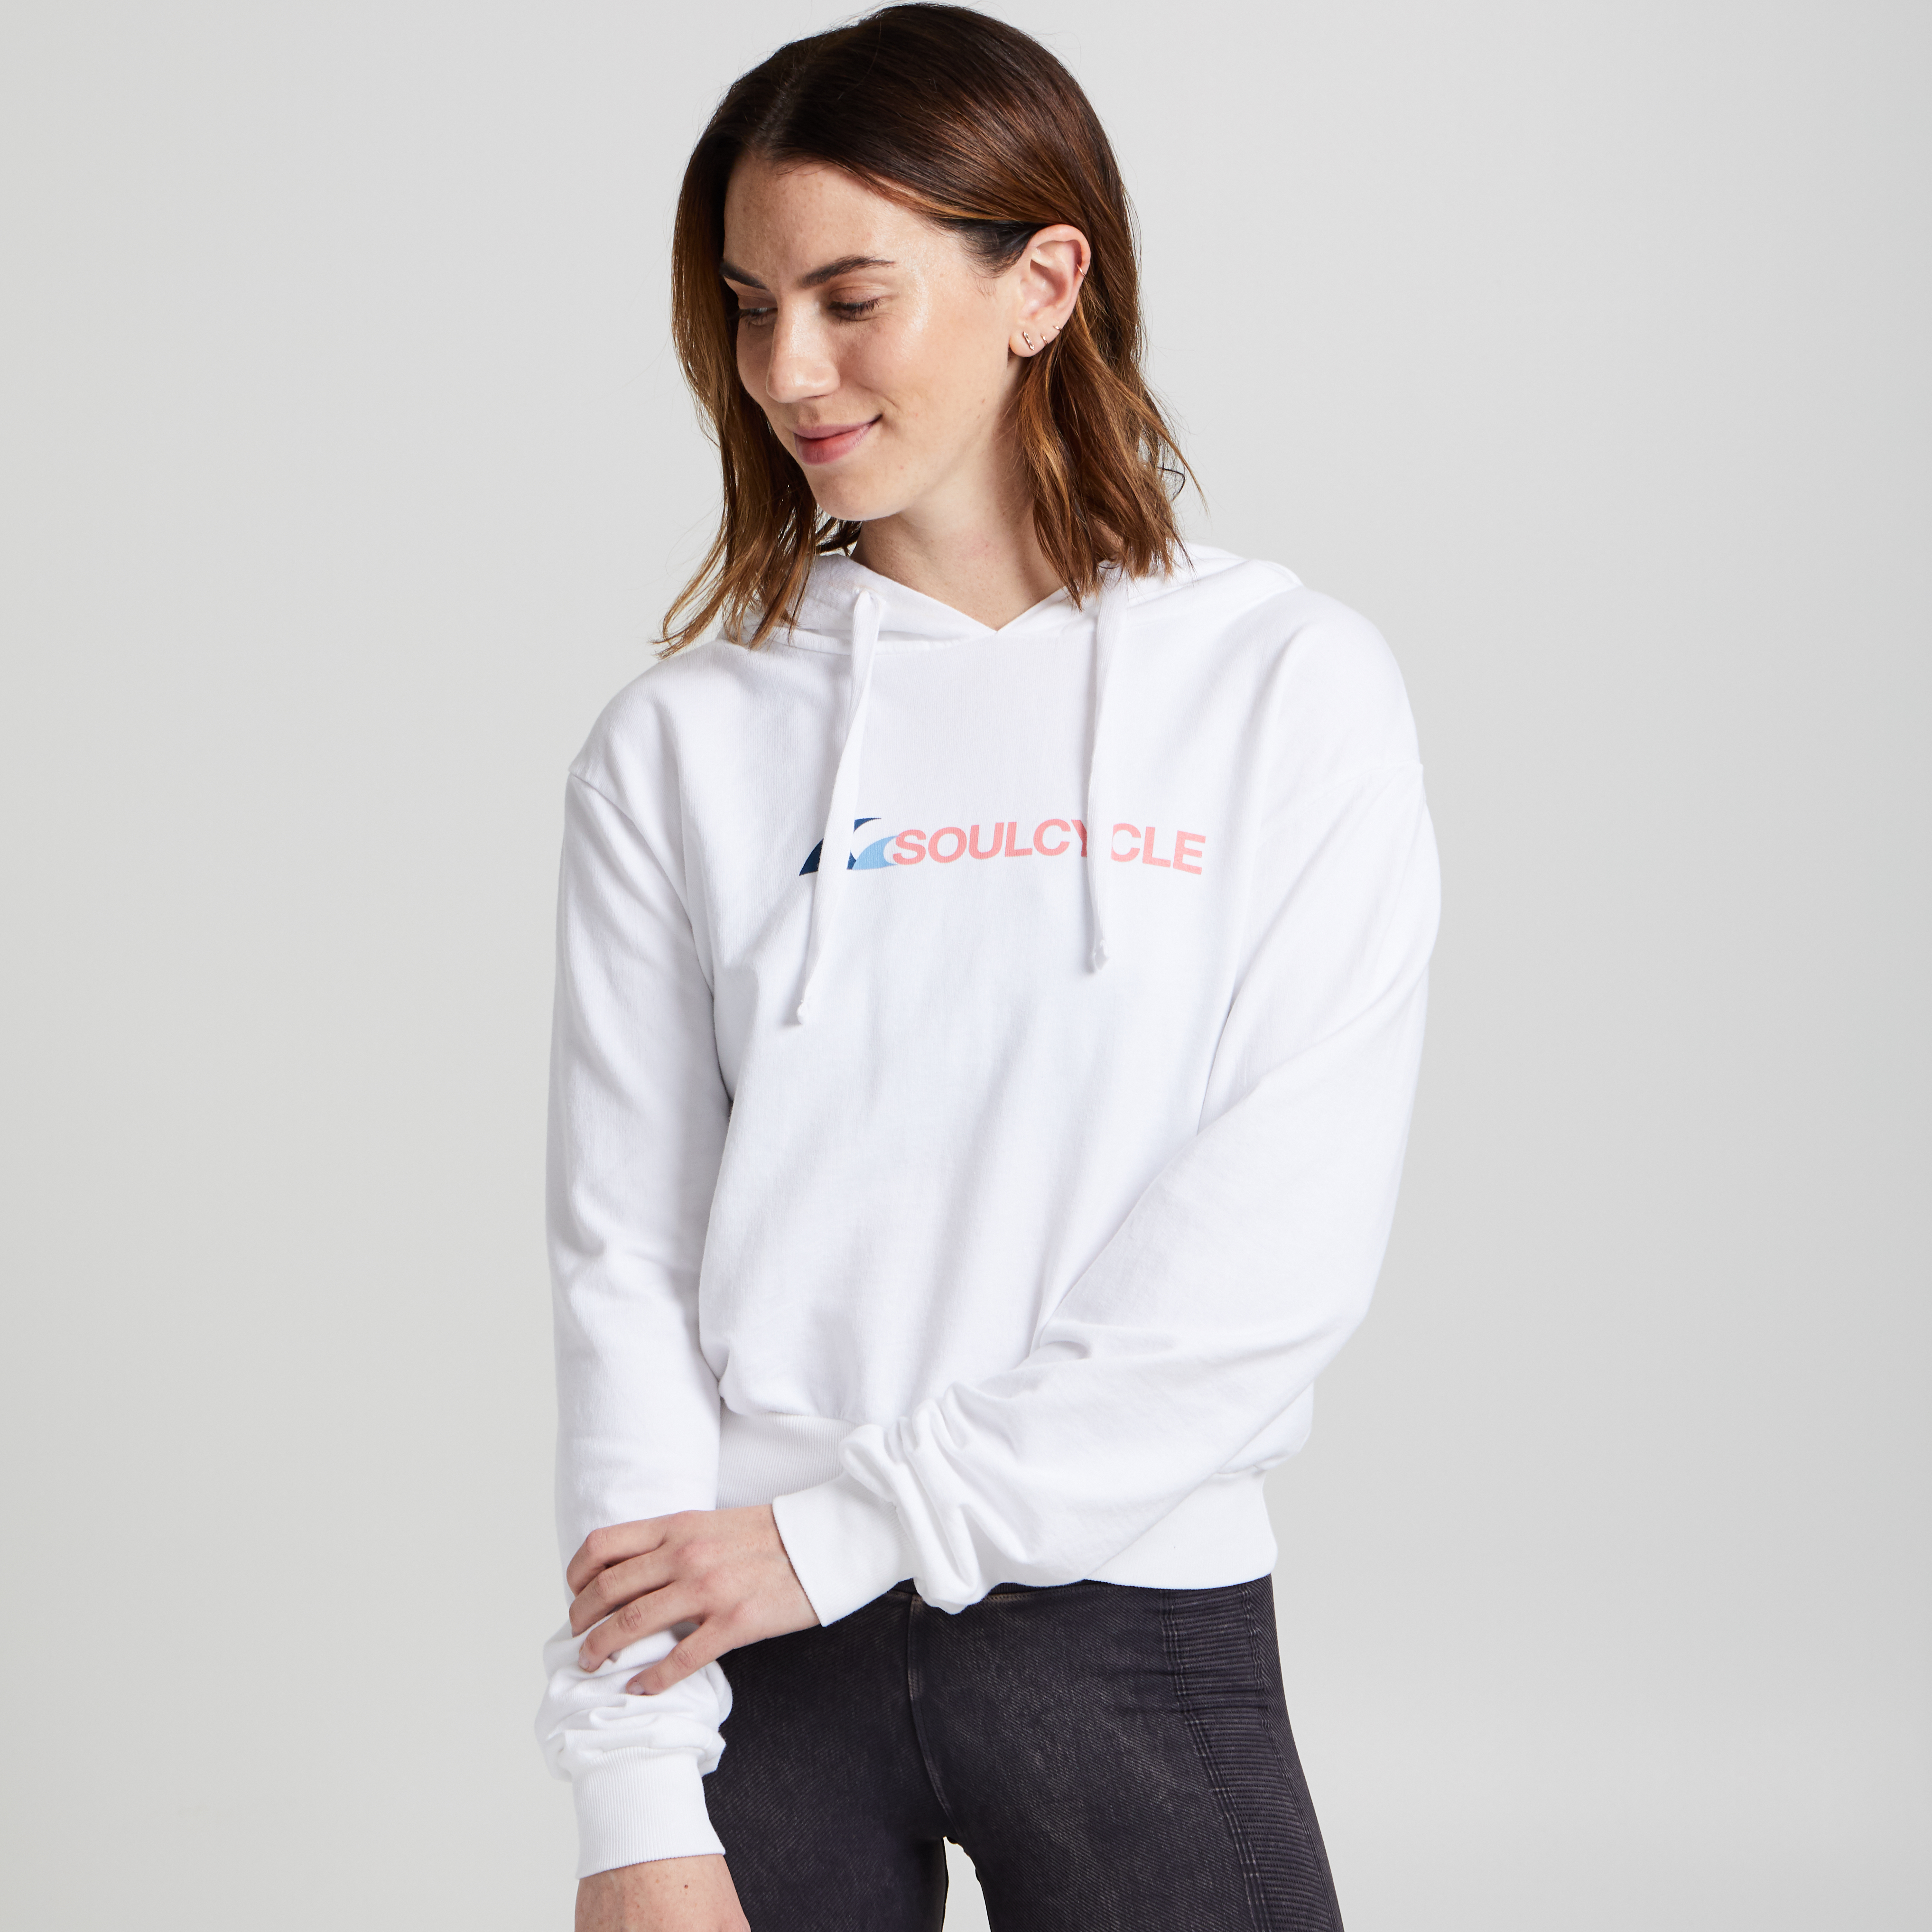 Soul by SoulCycle Online Exclusive White Hoodie - SoulCycle Shop